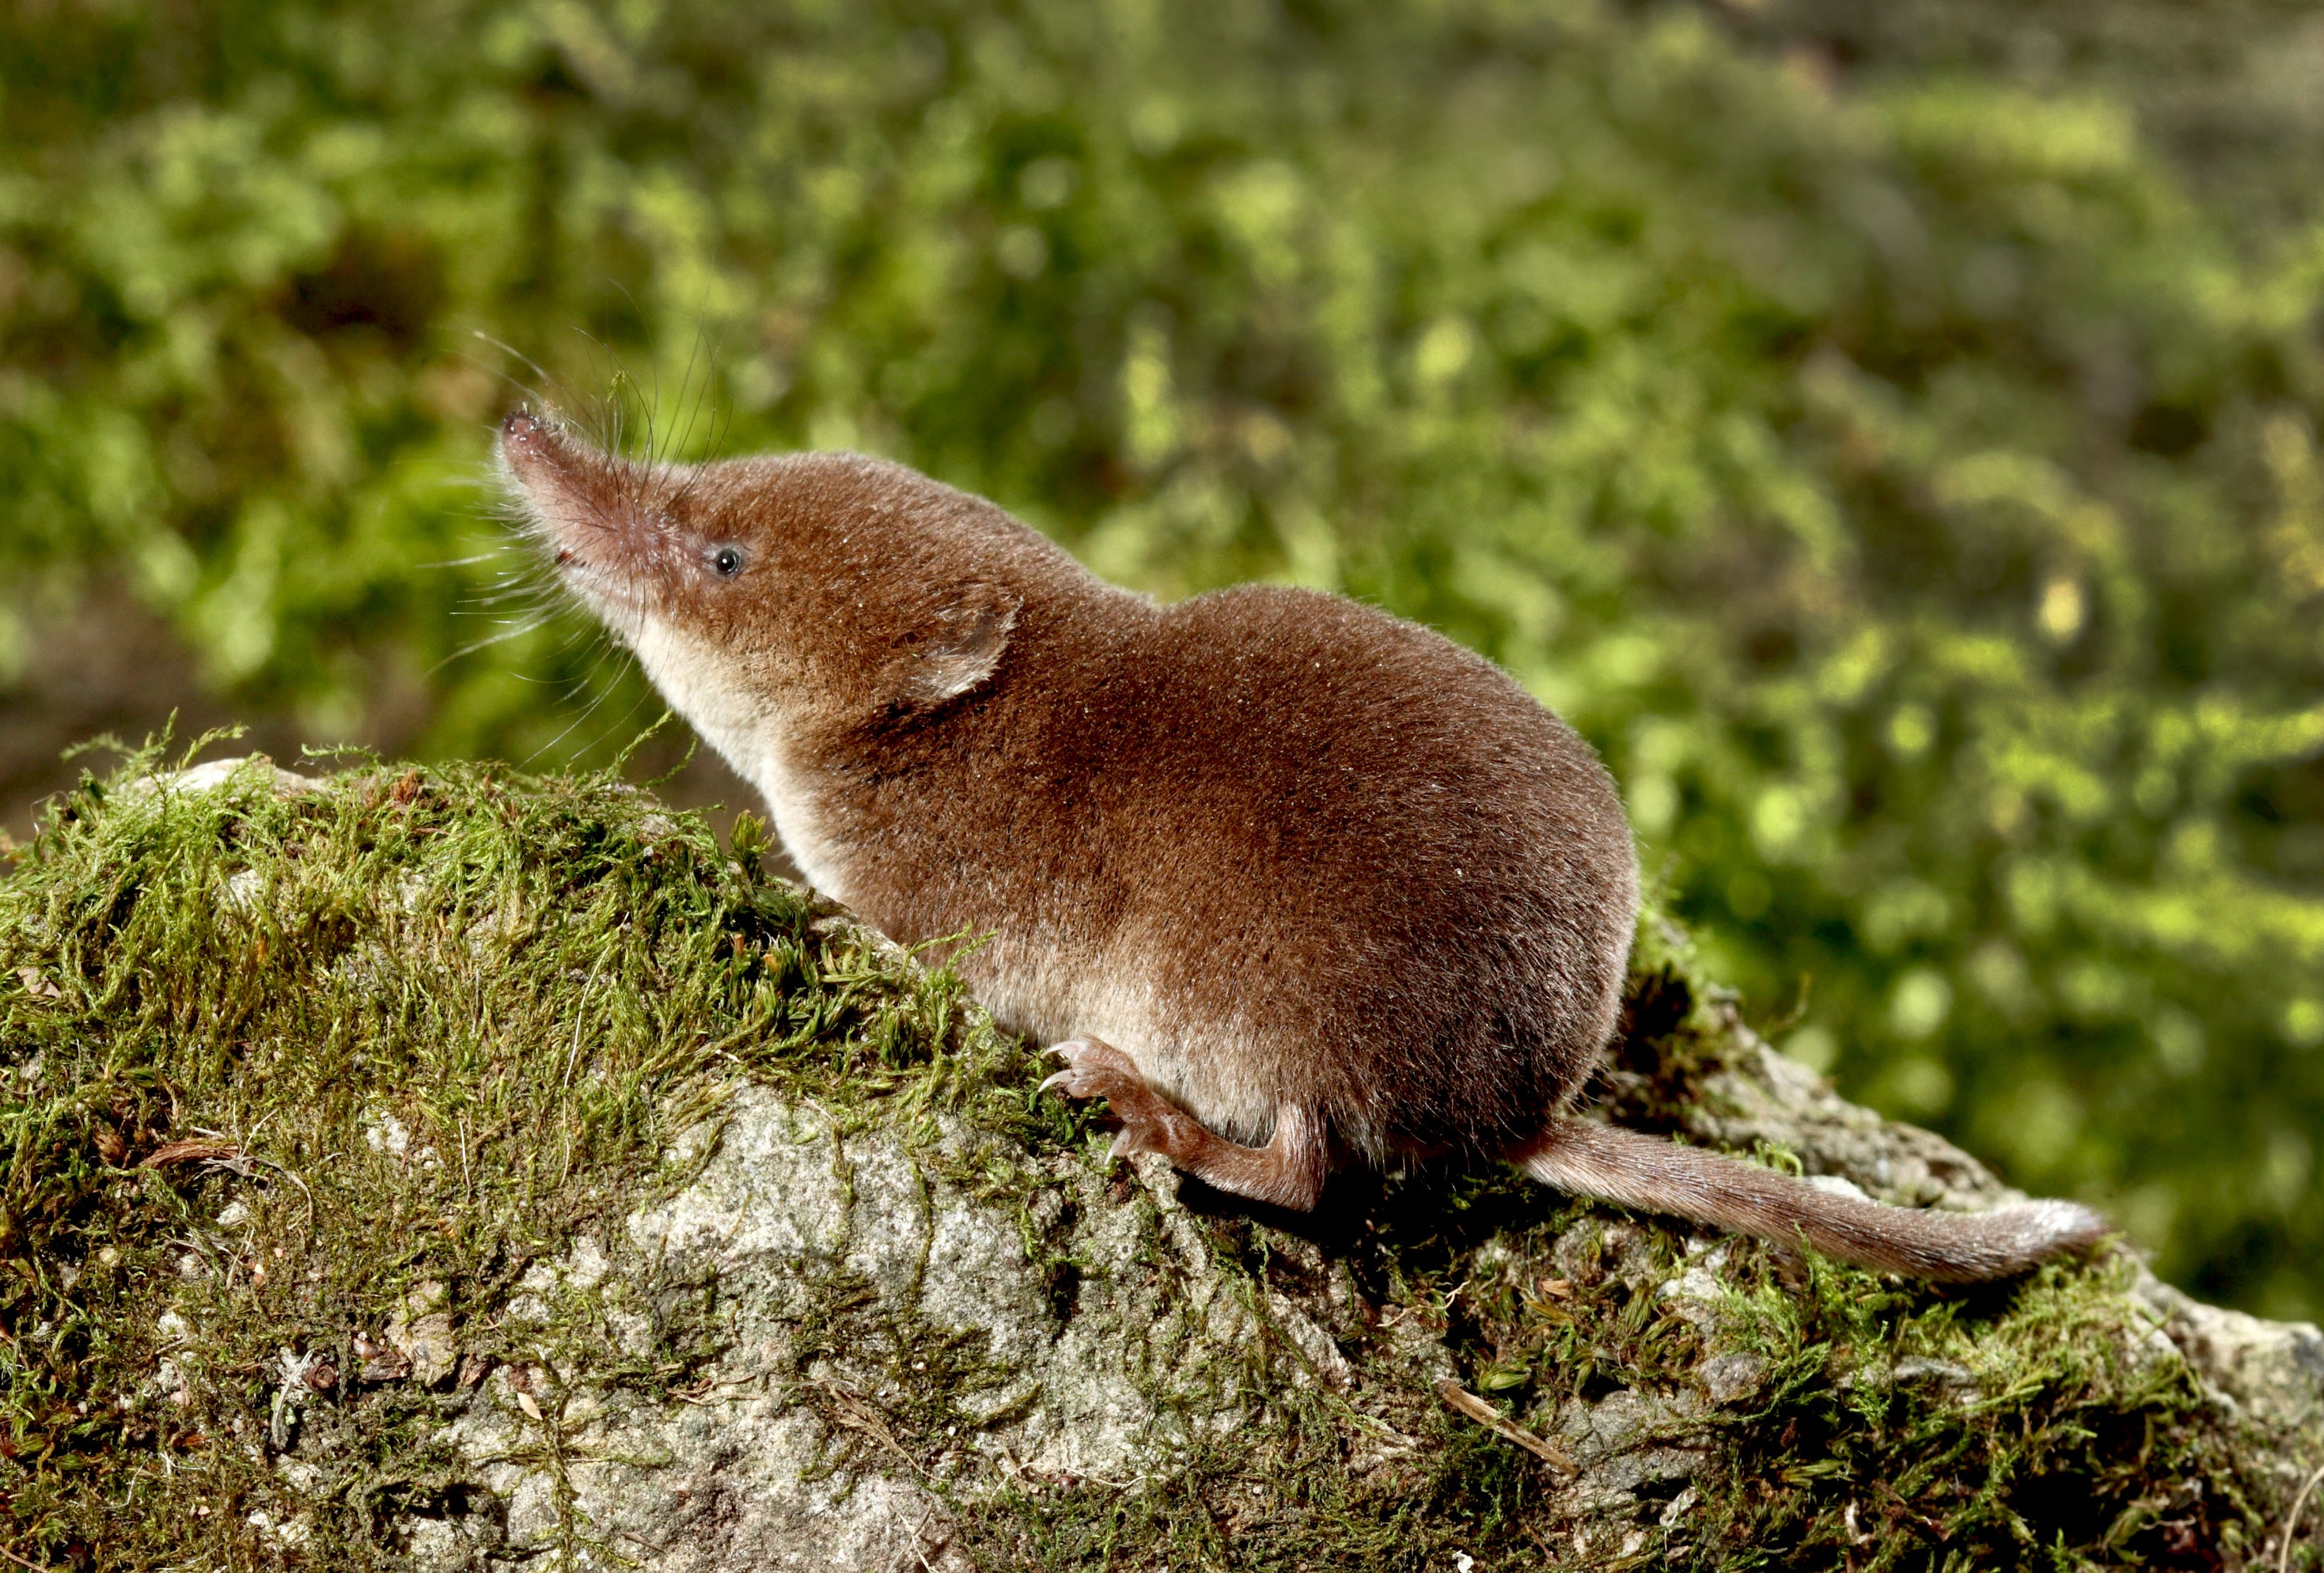 Small-Minded Strategy: The Common Shrew Shrinks Its Head to Survive Winter  - Scientific American